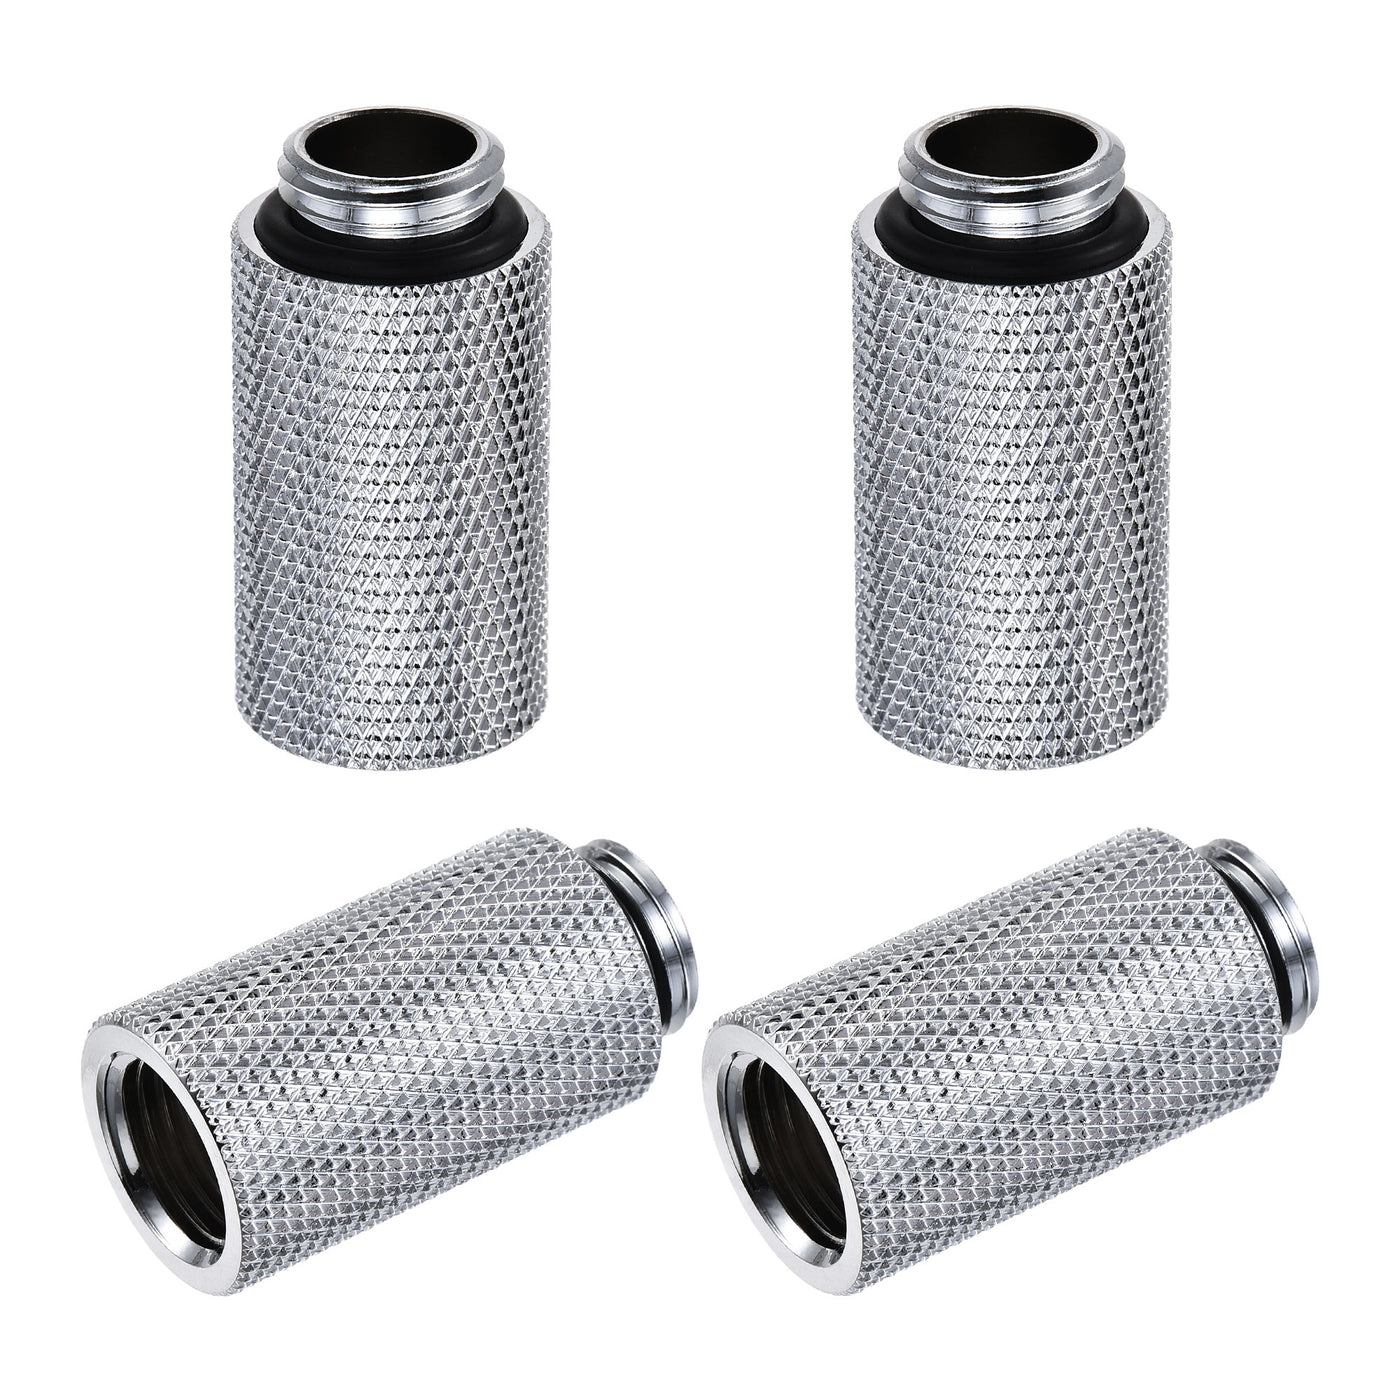 uxcell Uxcell Male to Female Extender Fitting G1/4 x 30mm for Water Cooling System Silver 4pcs